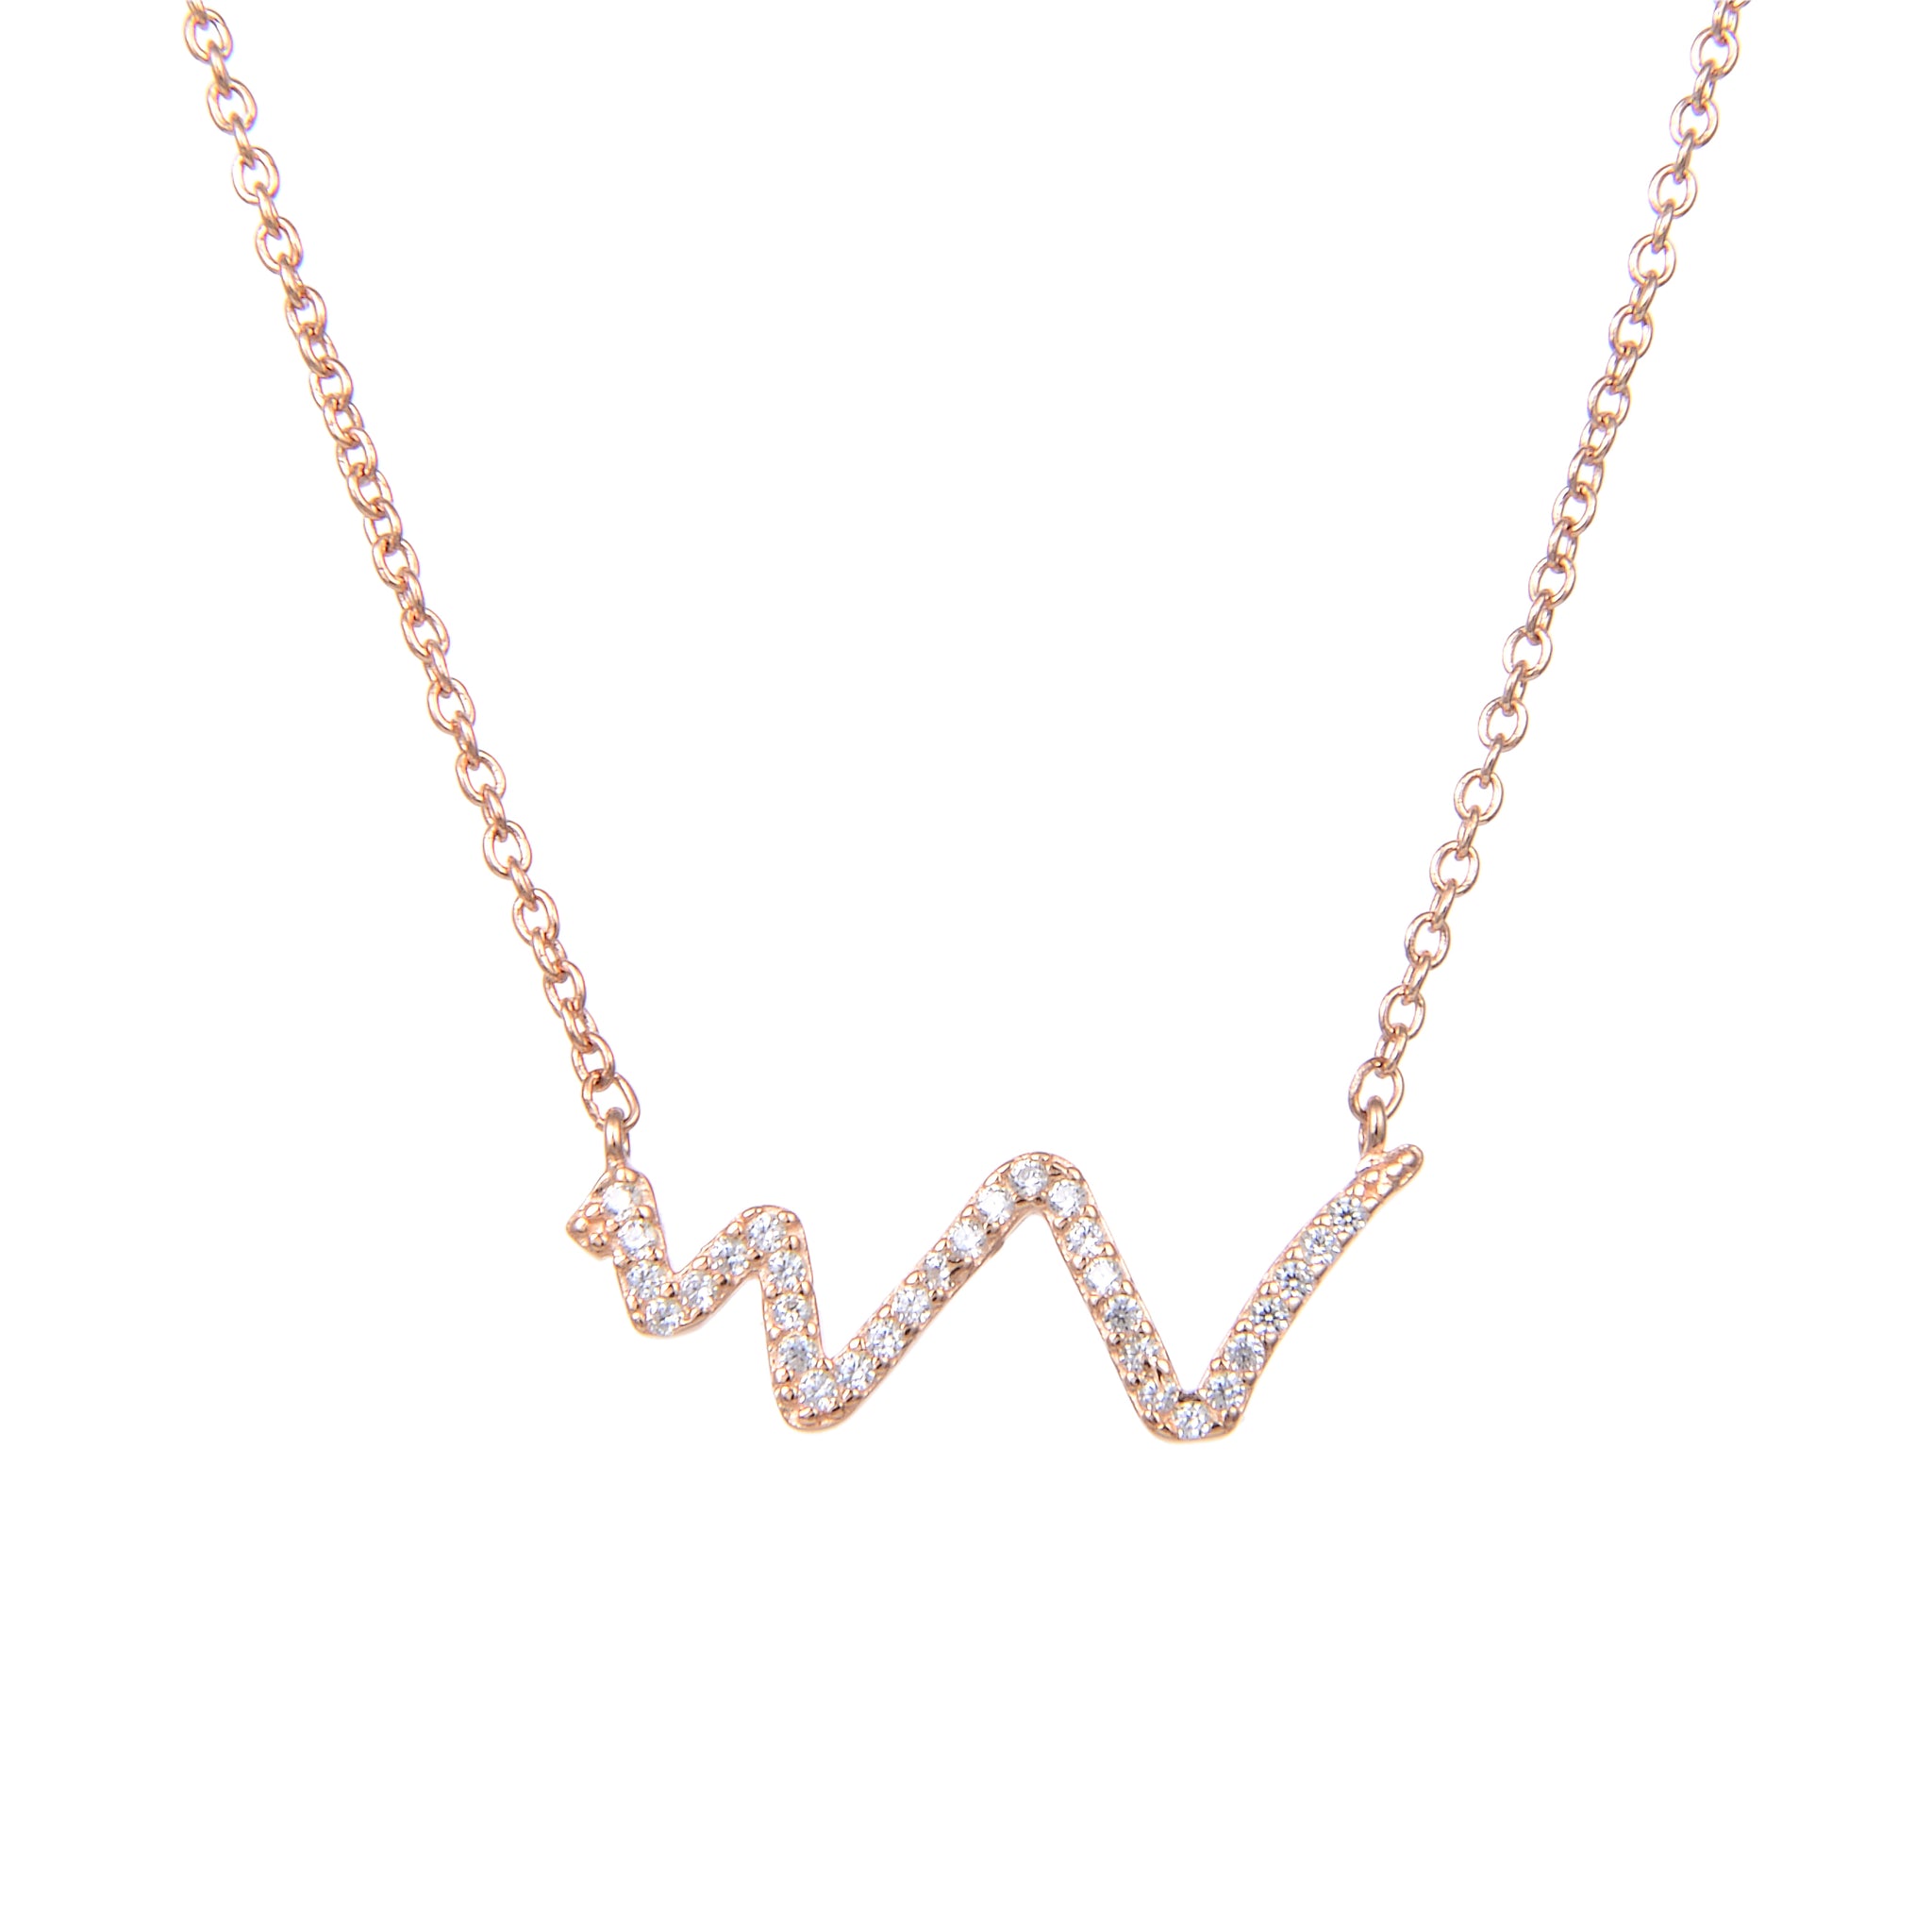 92.5 Sterling Silver Necklace Chain With CZ Cubic Zirconia Life Line Waves Shape Sterling Silver Pendant